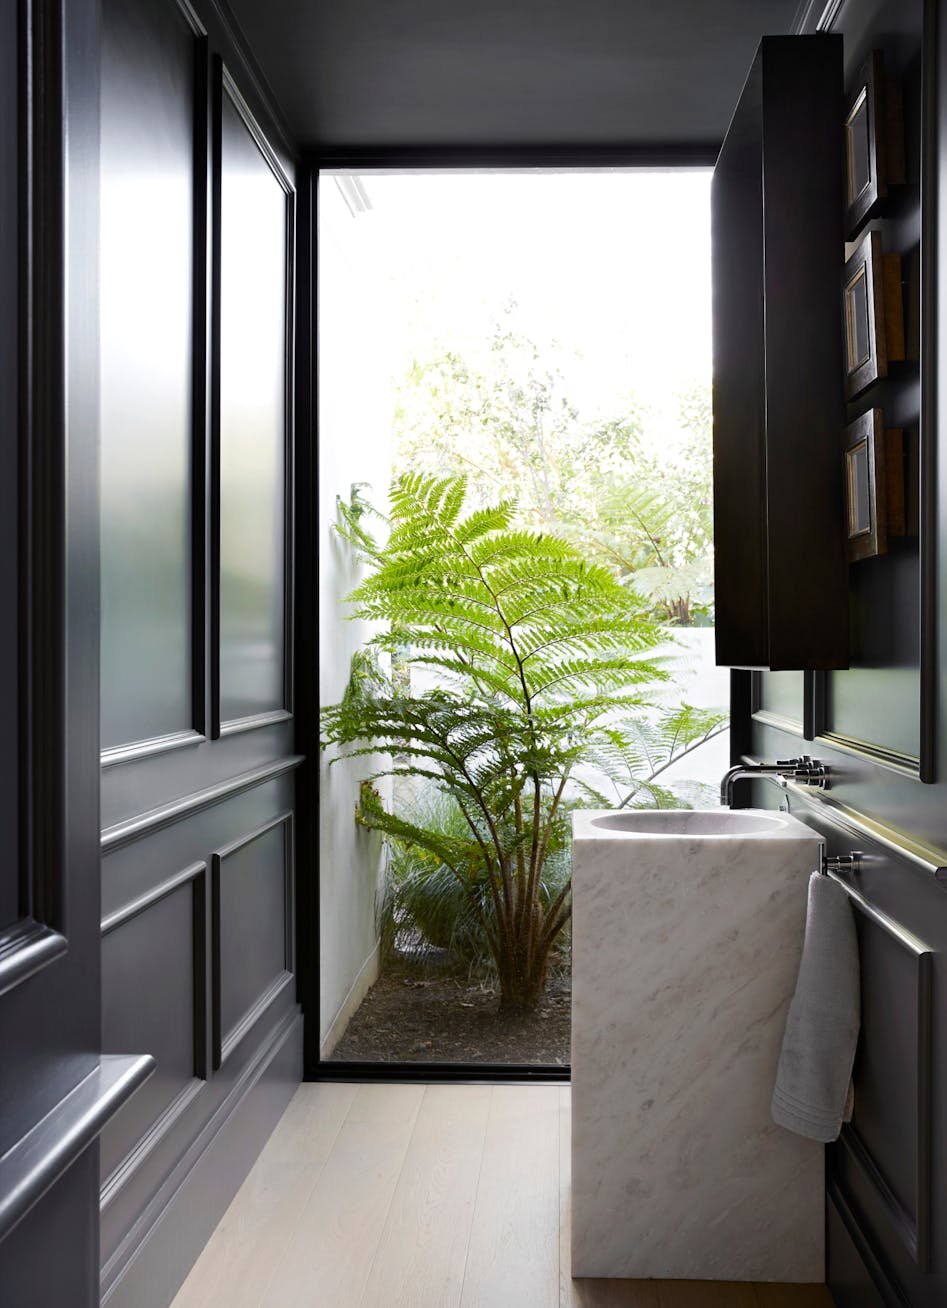 A modern bathroom with black walls, a basin in the foreground and a large window in the background with a view of a large plant outside.